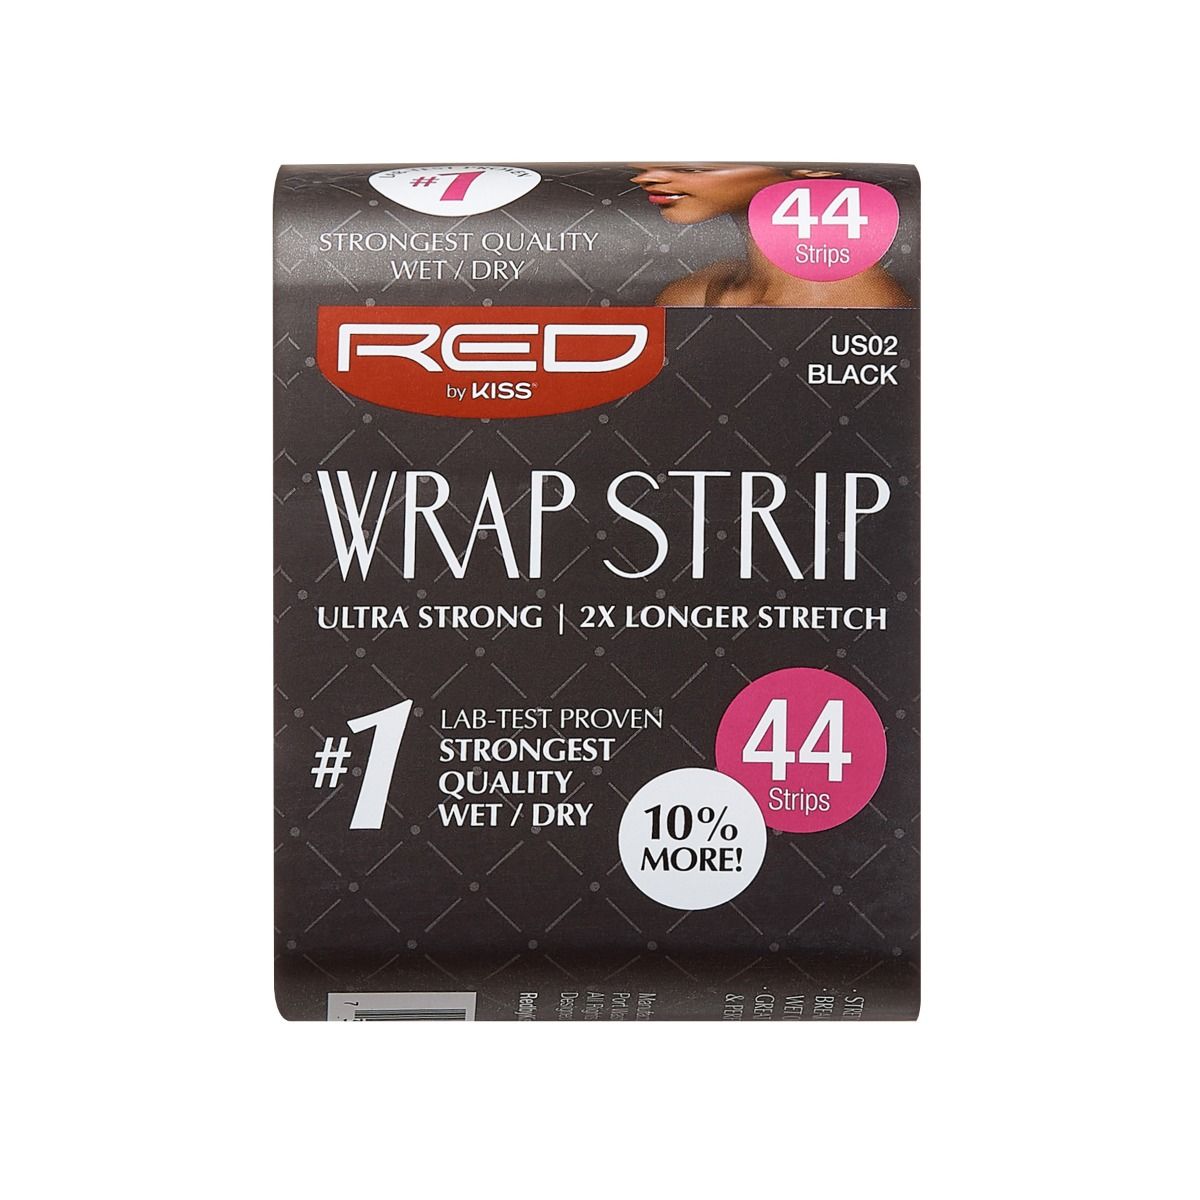 Red by Kiss Wrap Strips Black 3.5" 44 Strips #US02 (1 PACK)